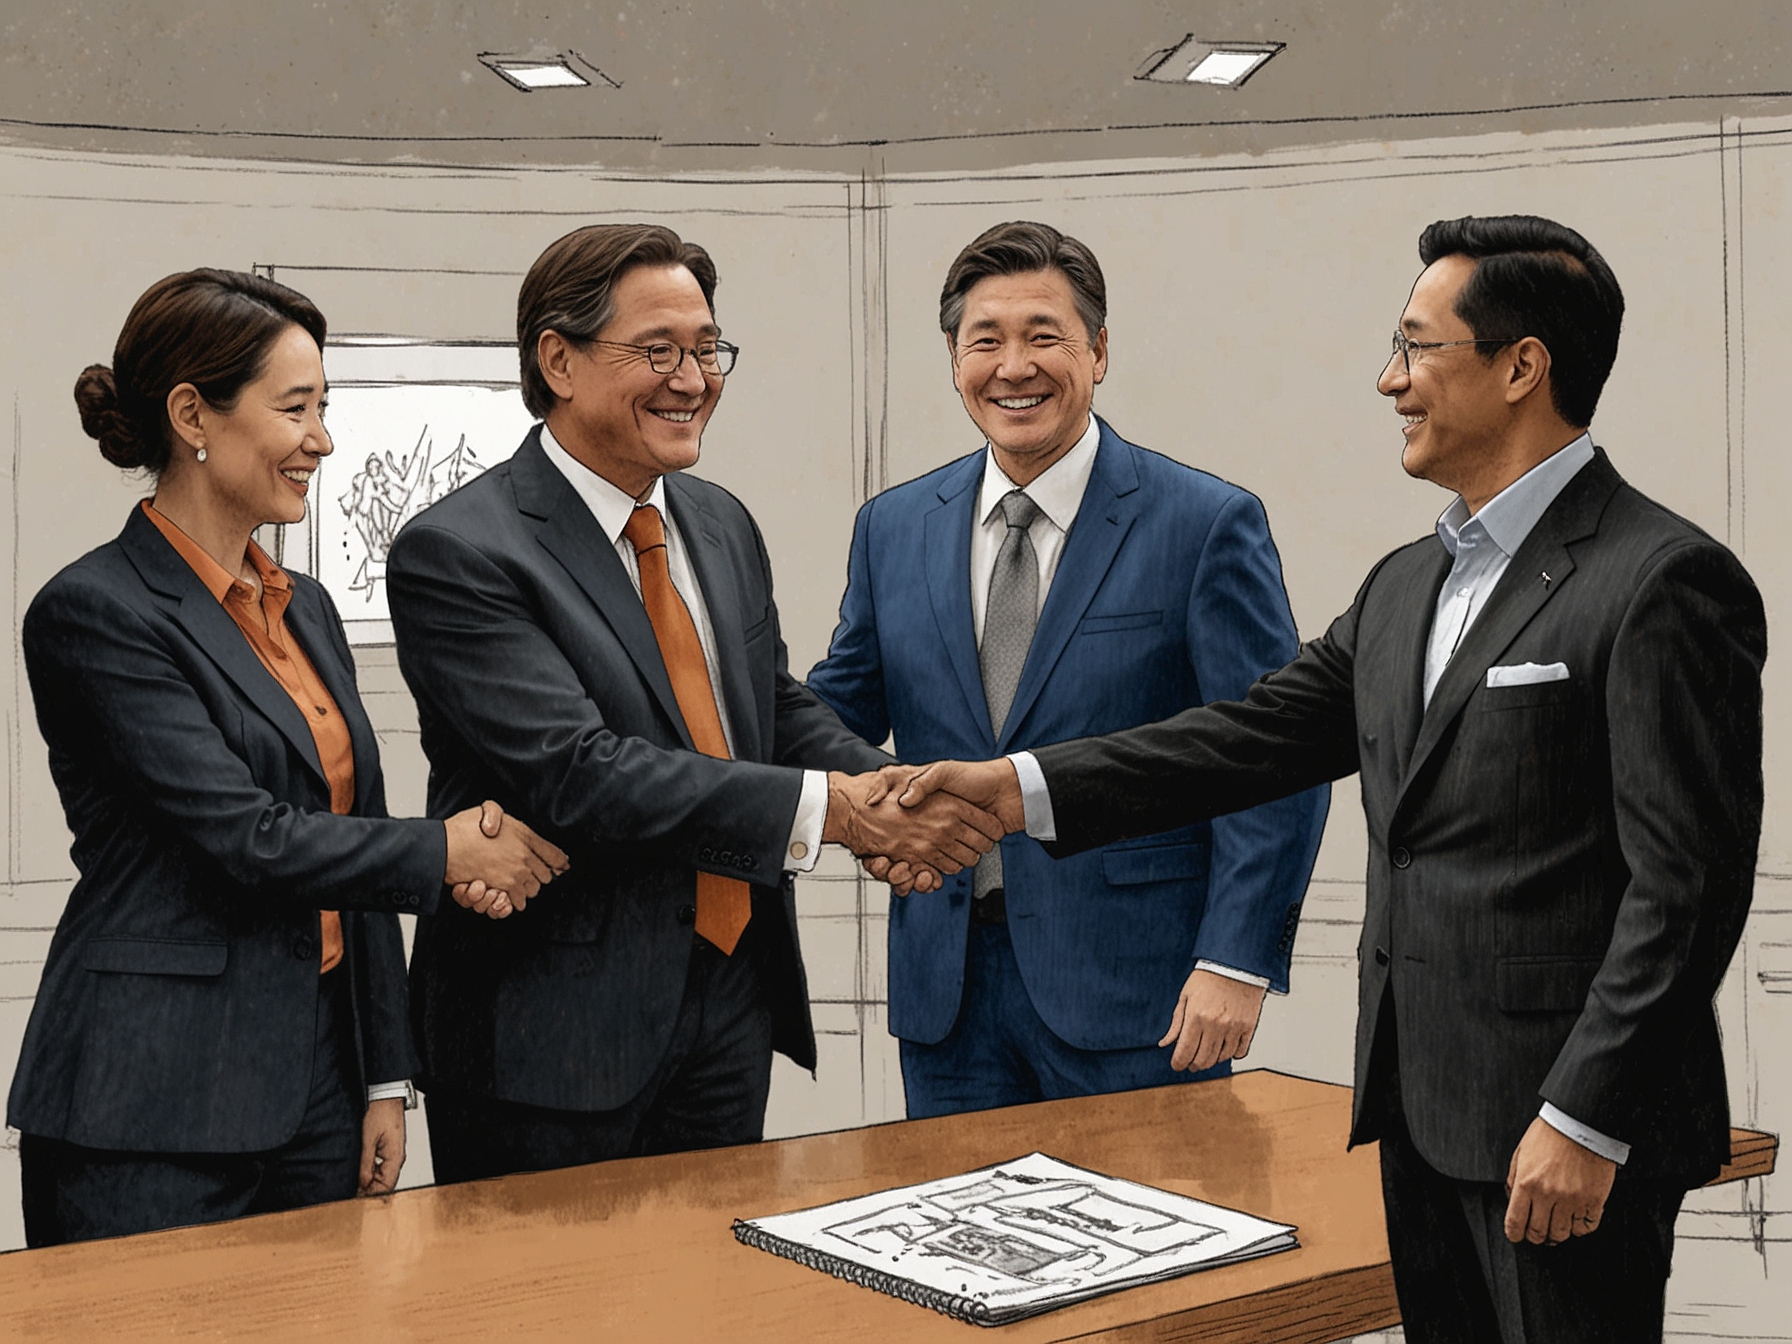 John Doe, the newly appointed CEO of Star Entertainment Group, is seen shaking hands with board members, symbolizing the company's optimistic future and leadership change.